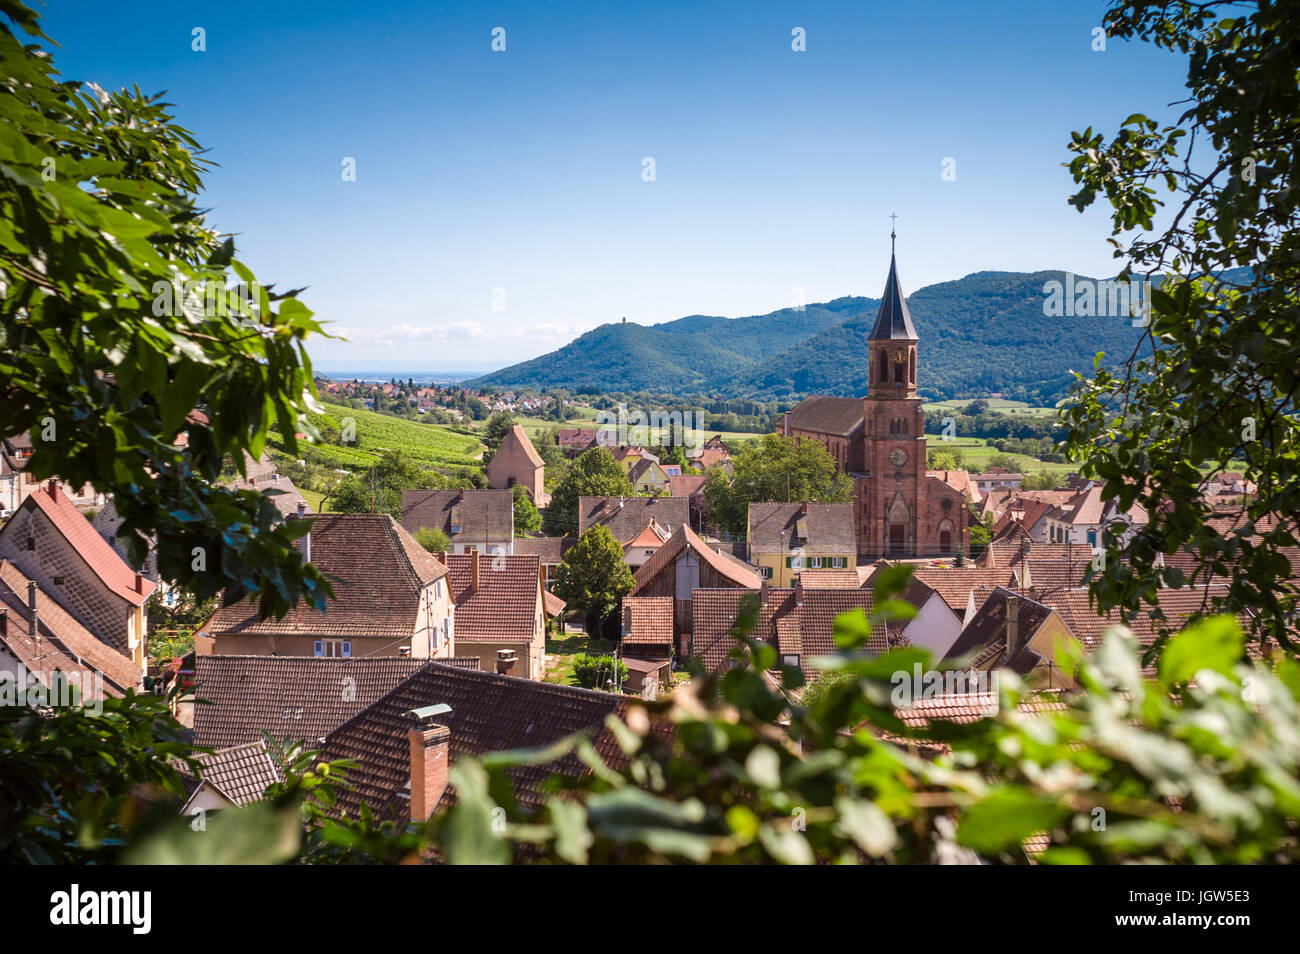 Panoramic view of the typical alsatian village Wihr-au-Val with rooftops, church and hills in the background Stock Photo